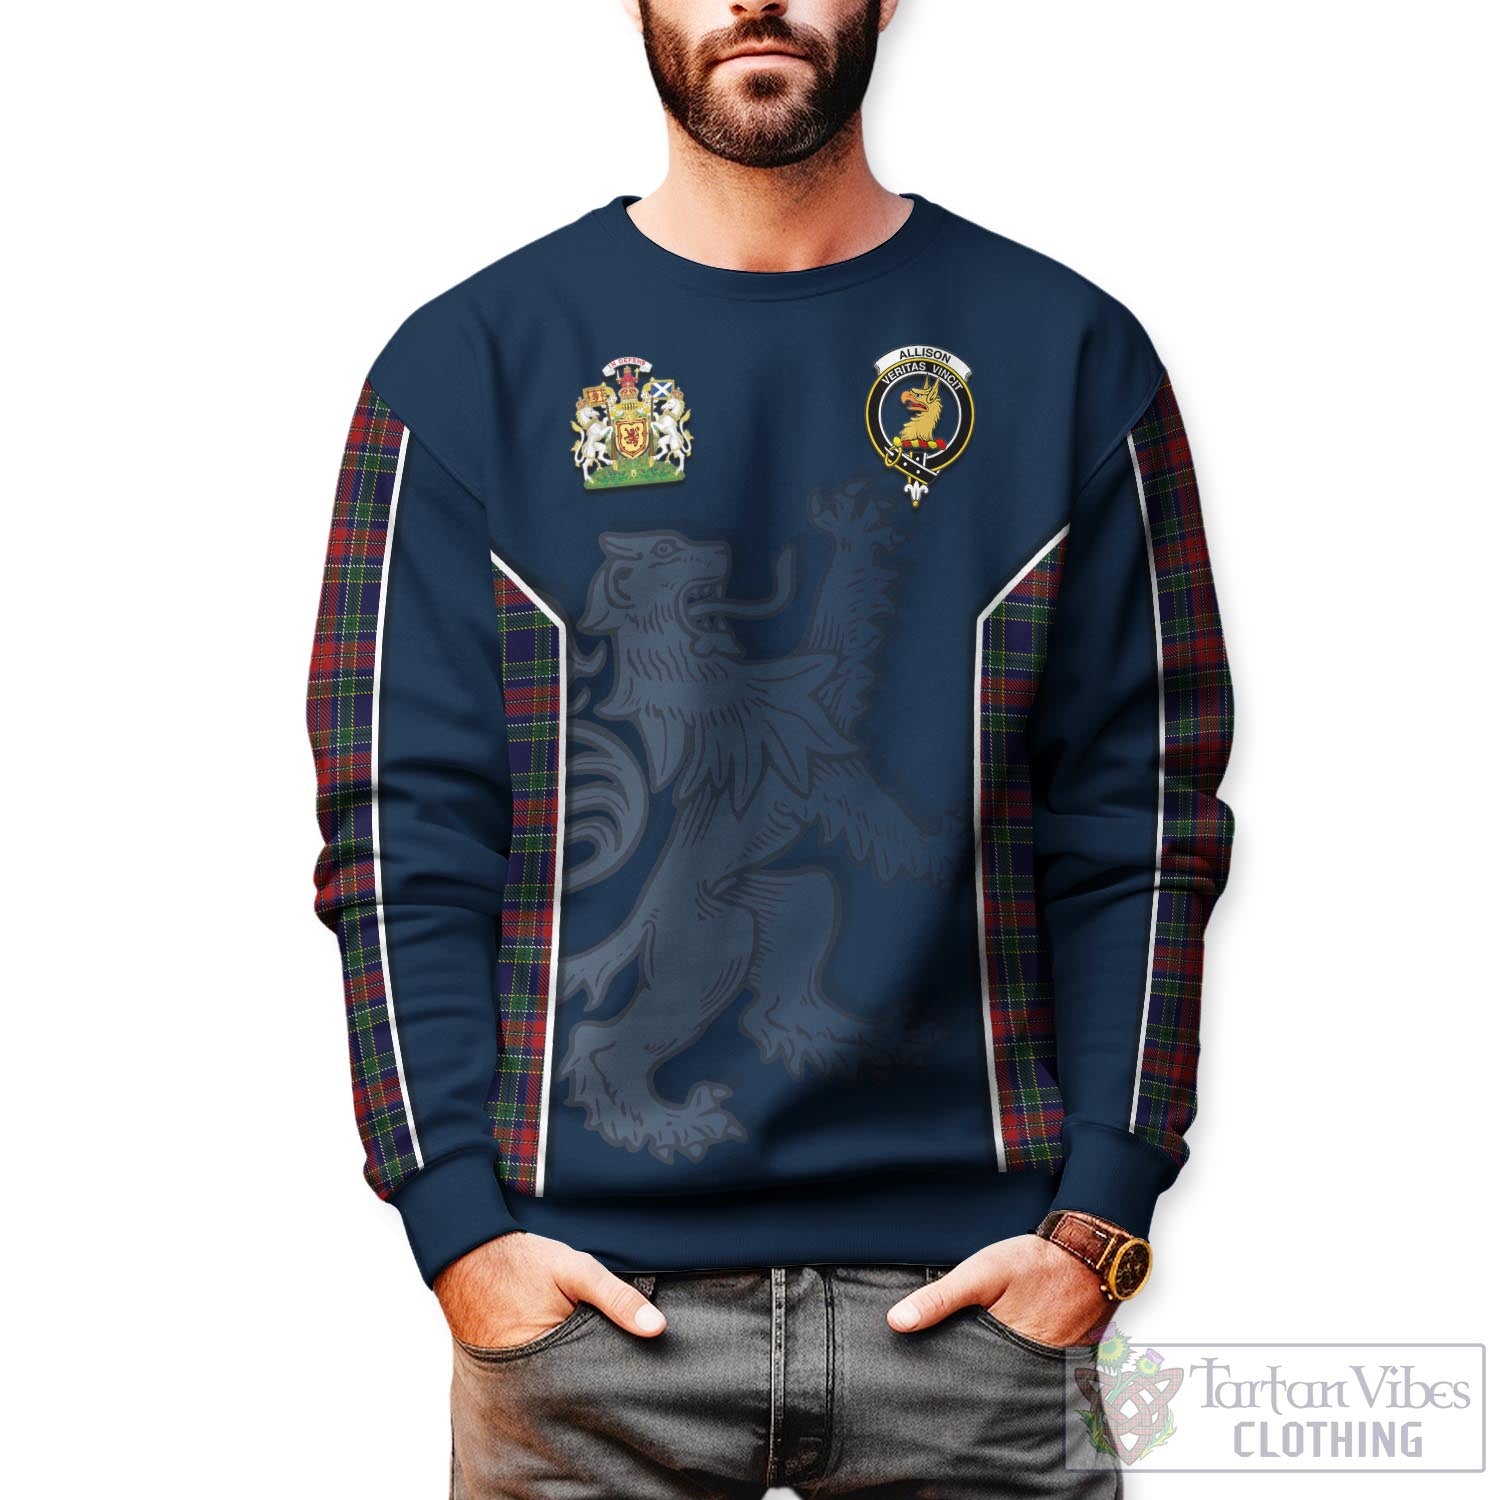 Tartan Vibes Clothing Allison Red Tartan Sweater with Family Crest and Lion Rampant Vibes Sport Style